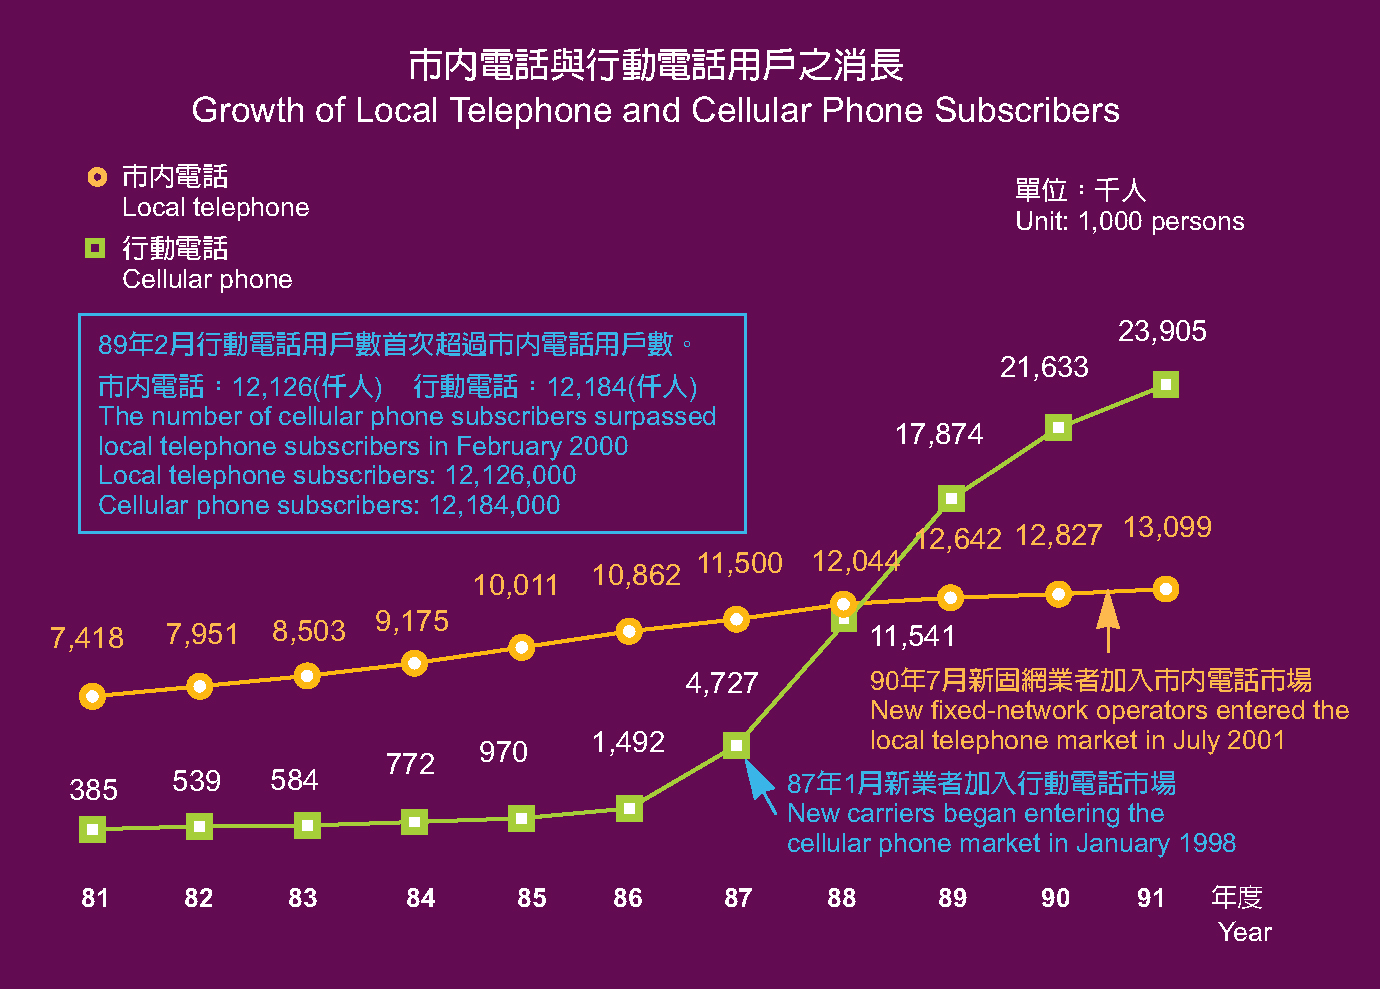 Growth of Local Telephone and Cellular Phone Subscribers